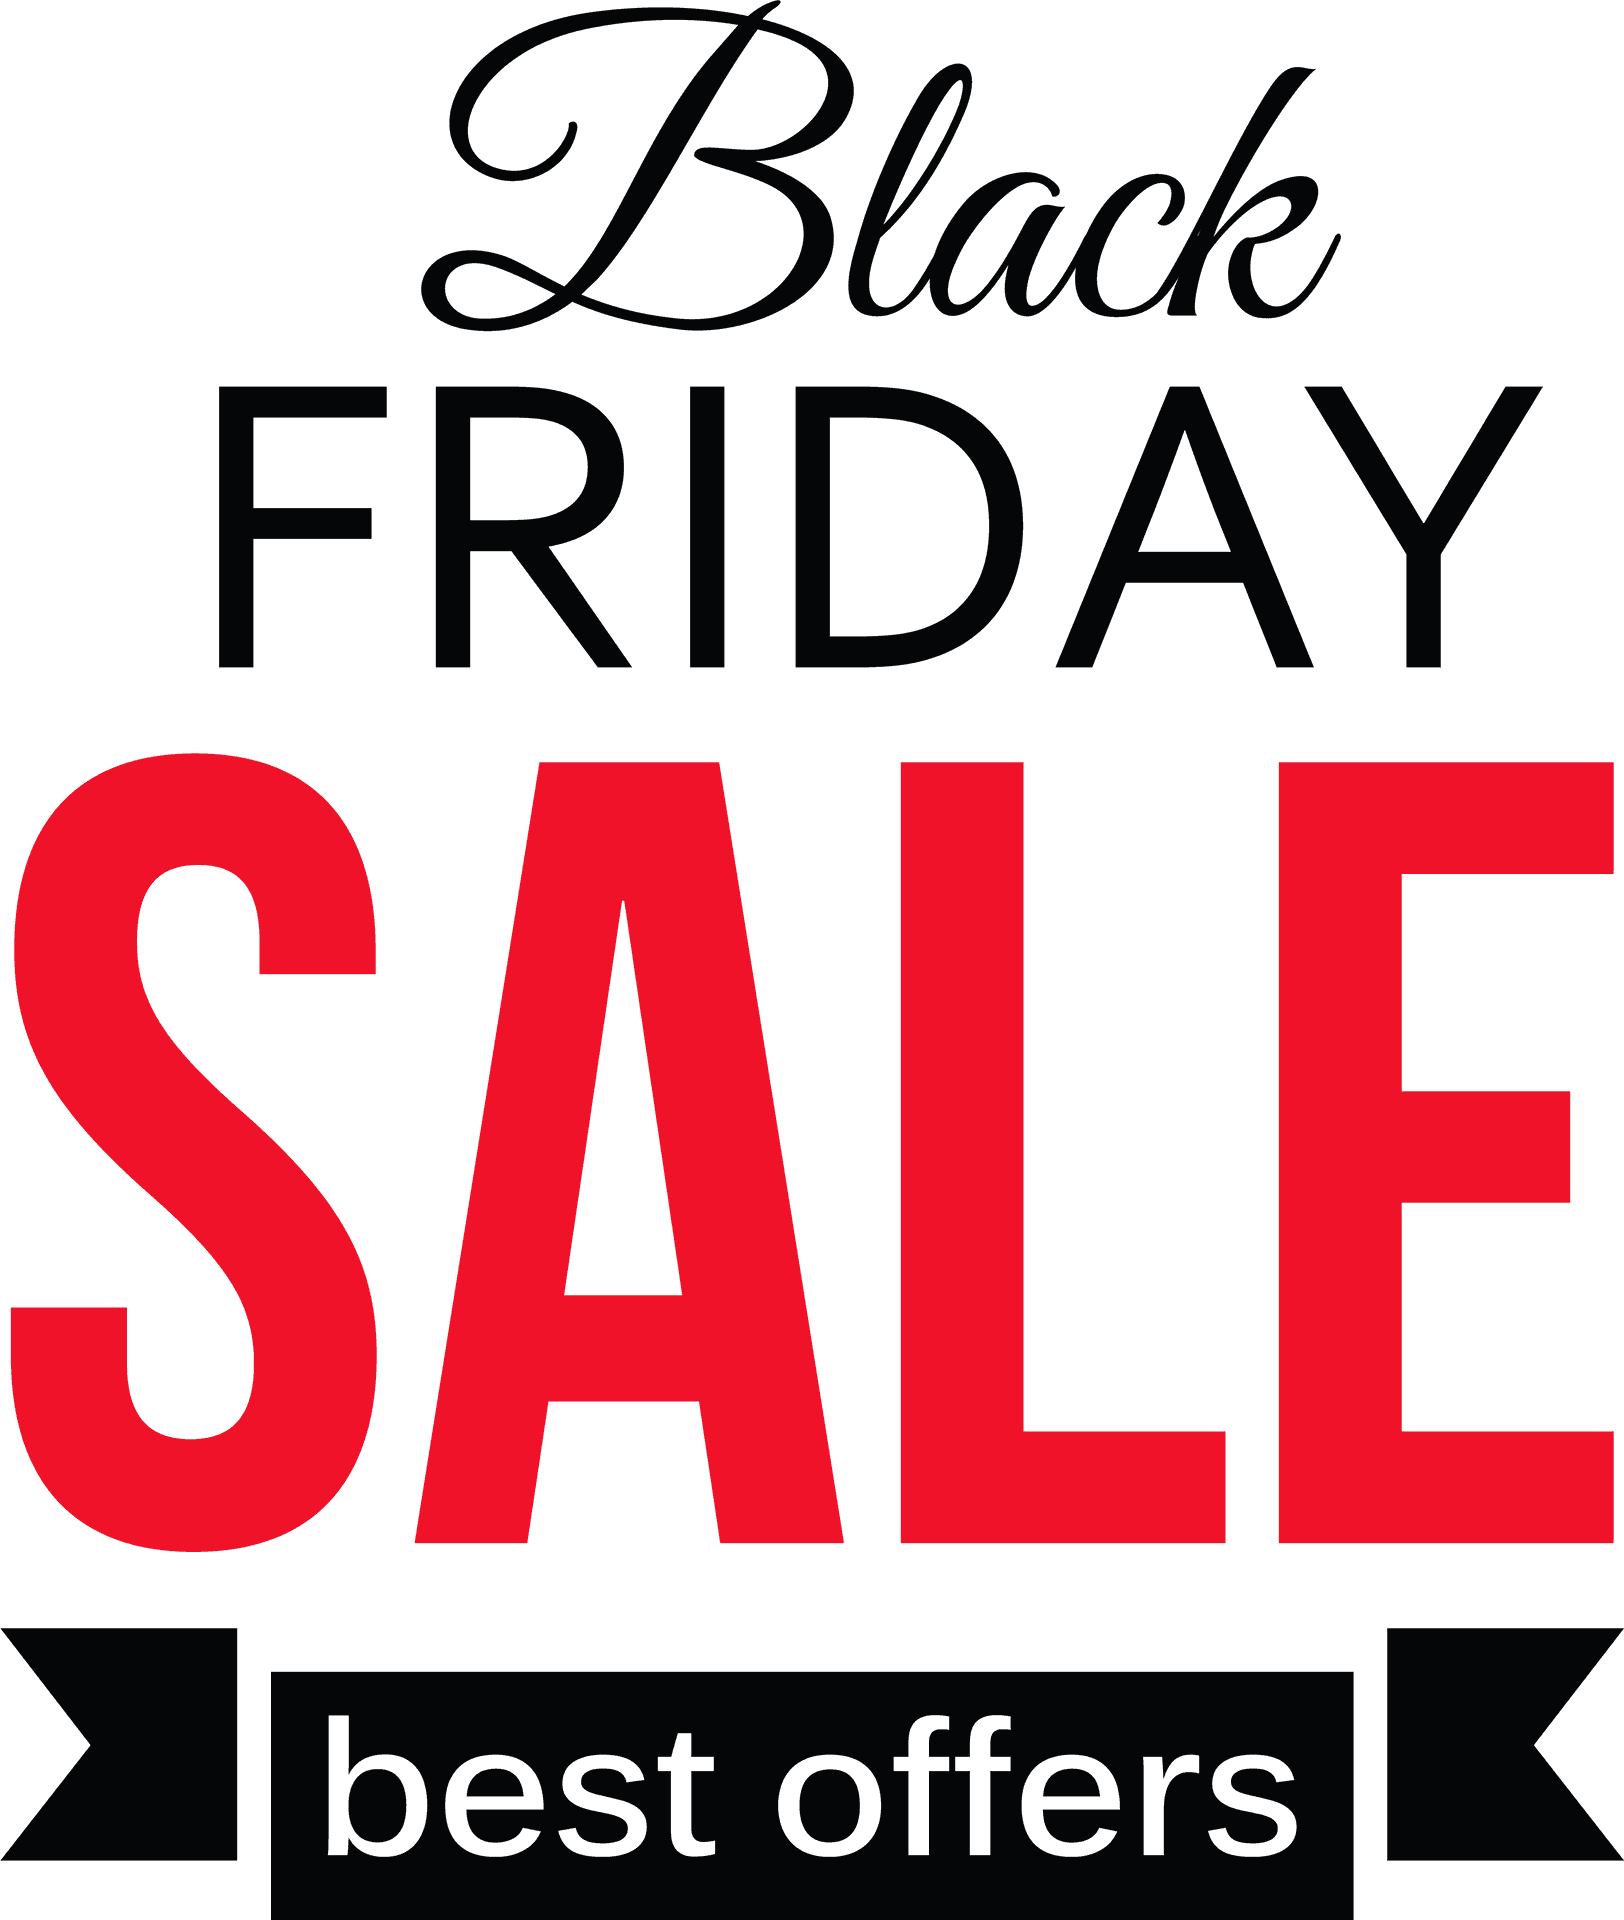 Black Friday Sale Best Offers PNG image